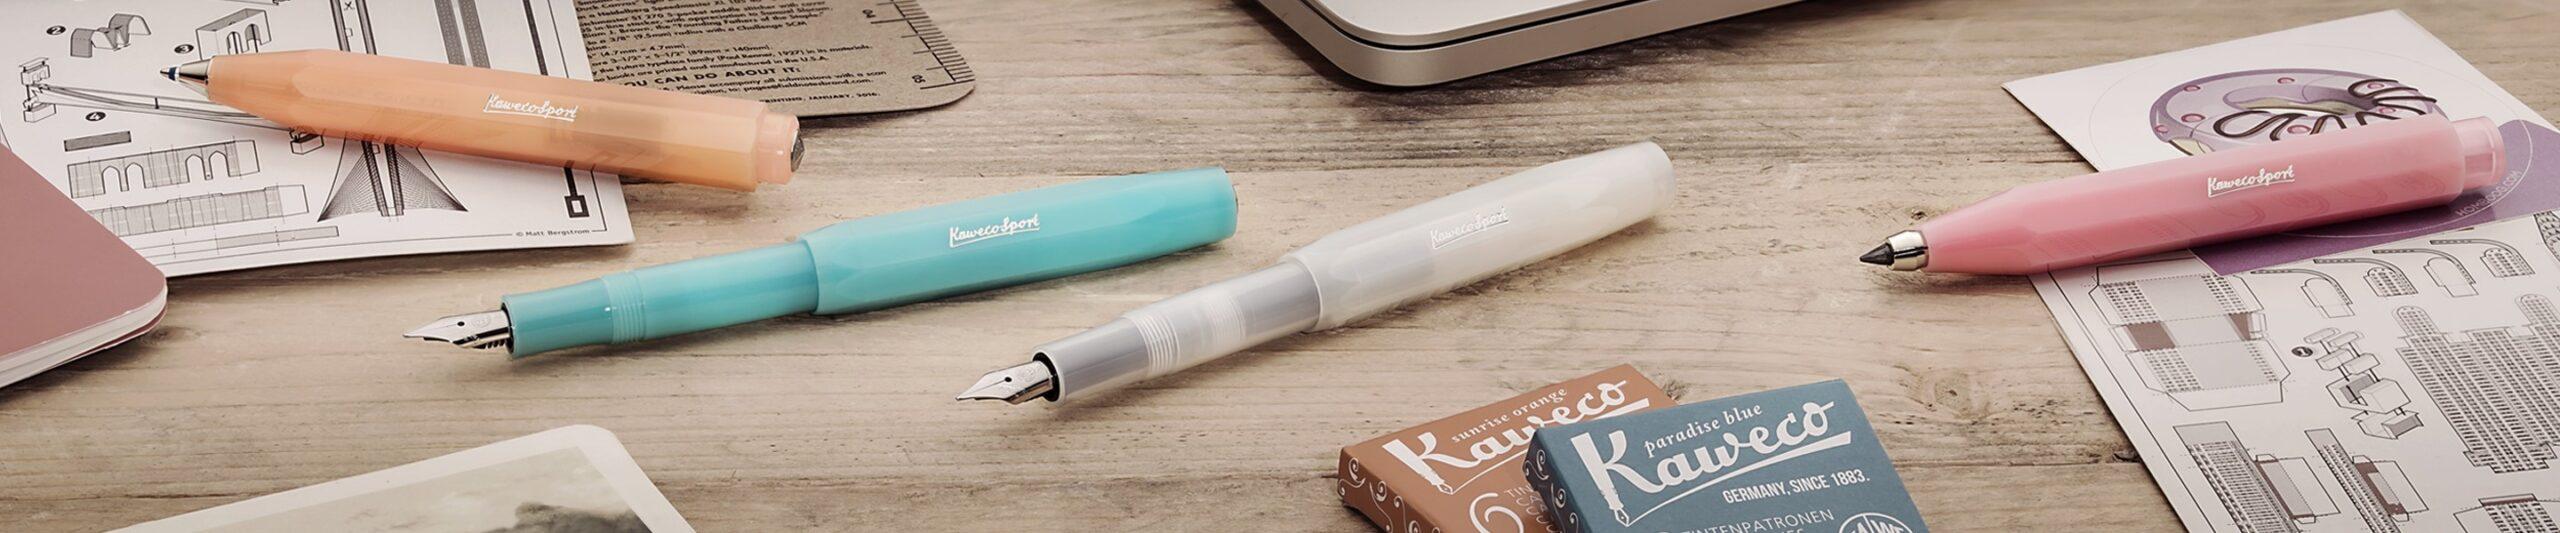 Kaweco Frosted Sport Fountain Pen Natural Coconut